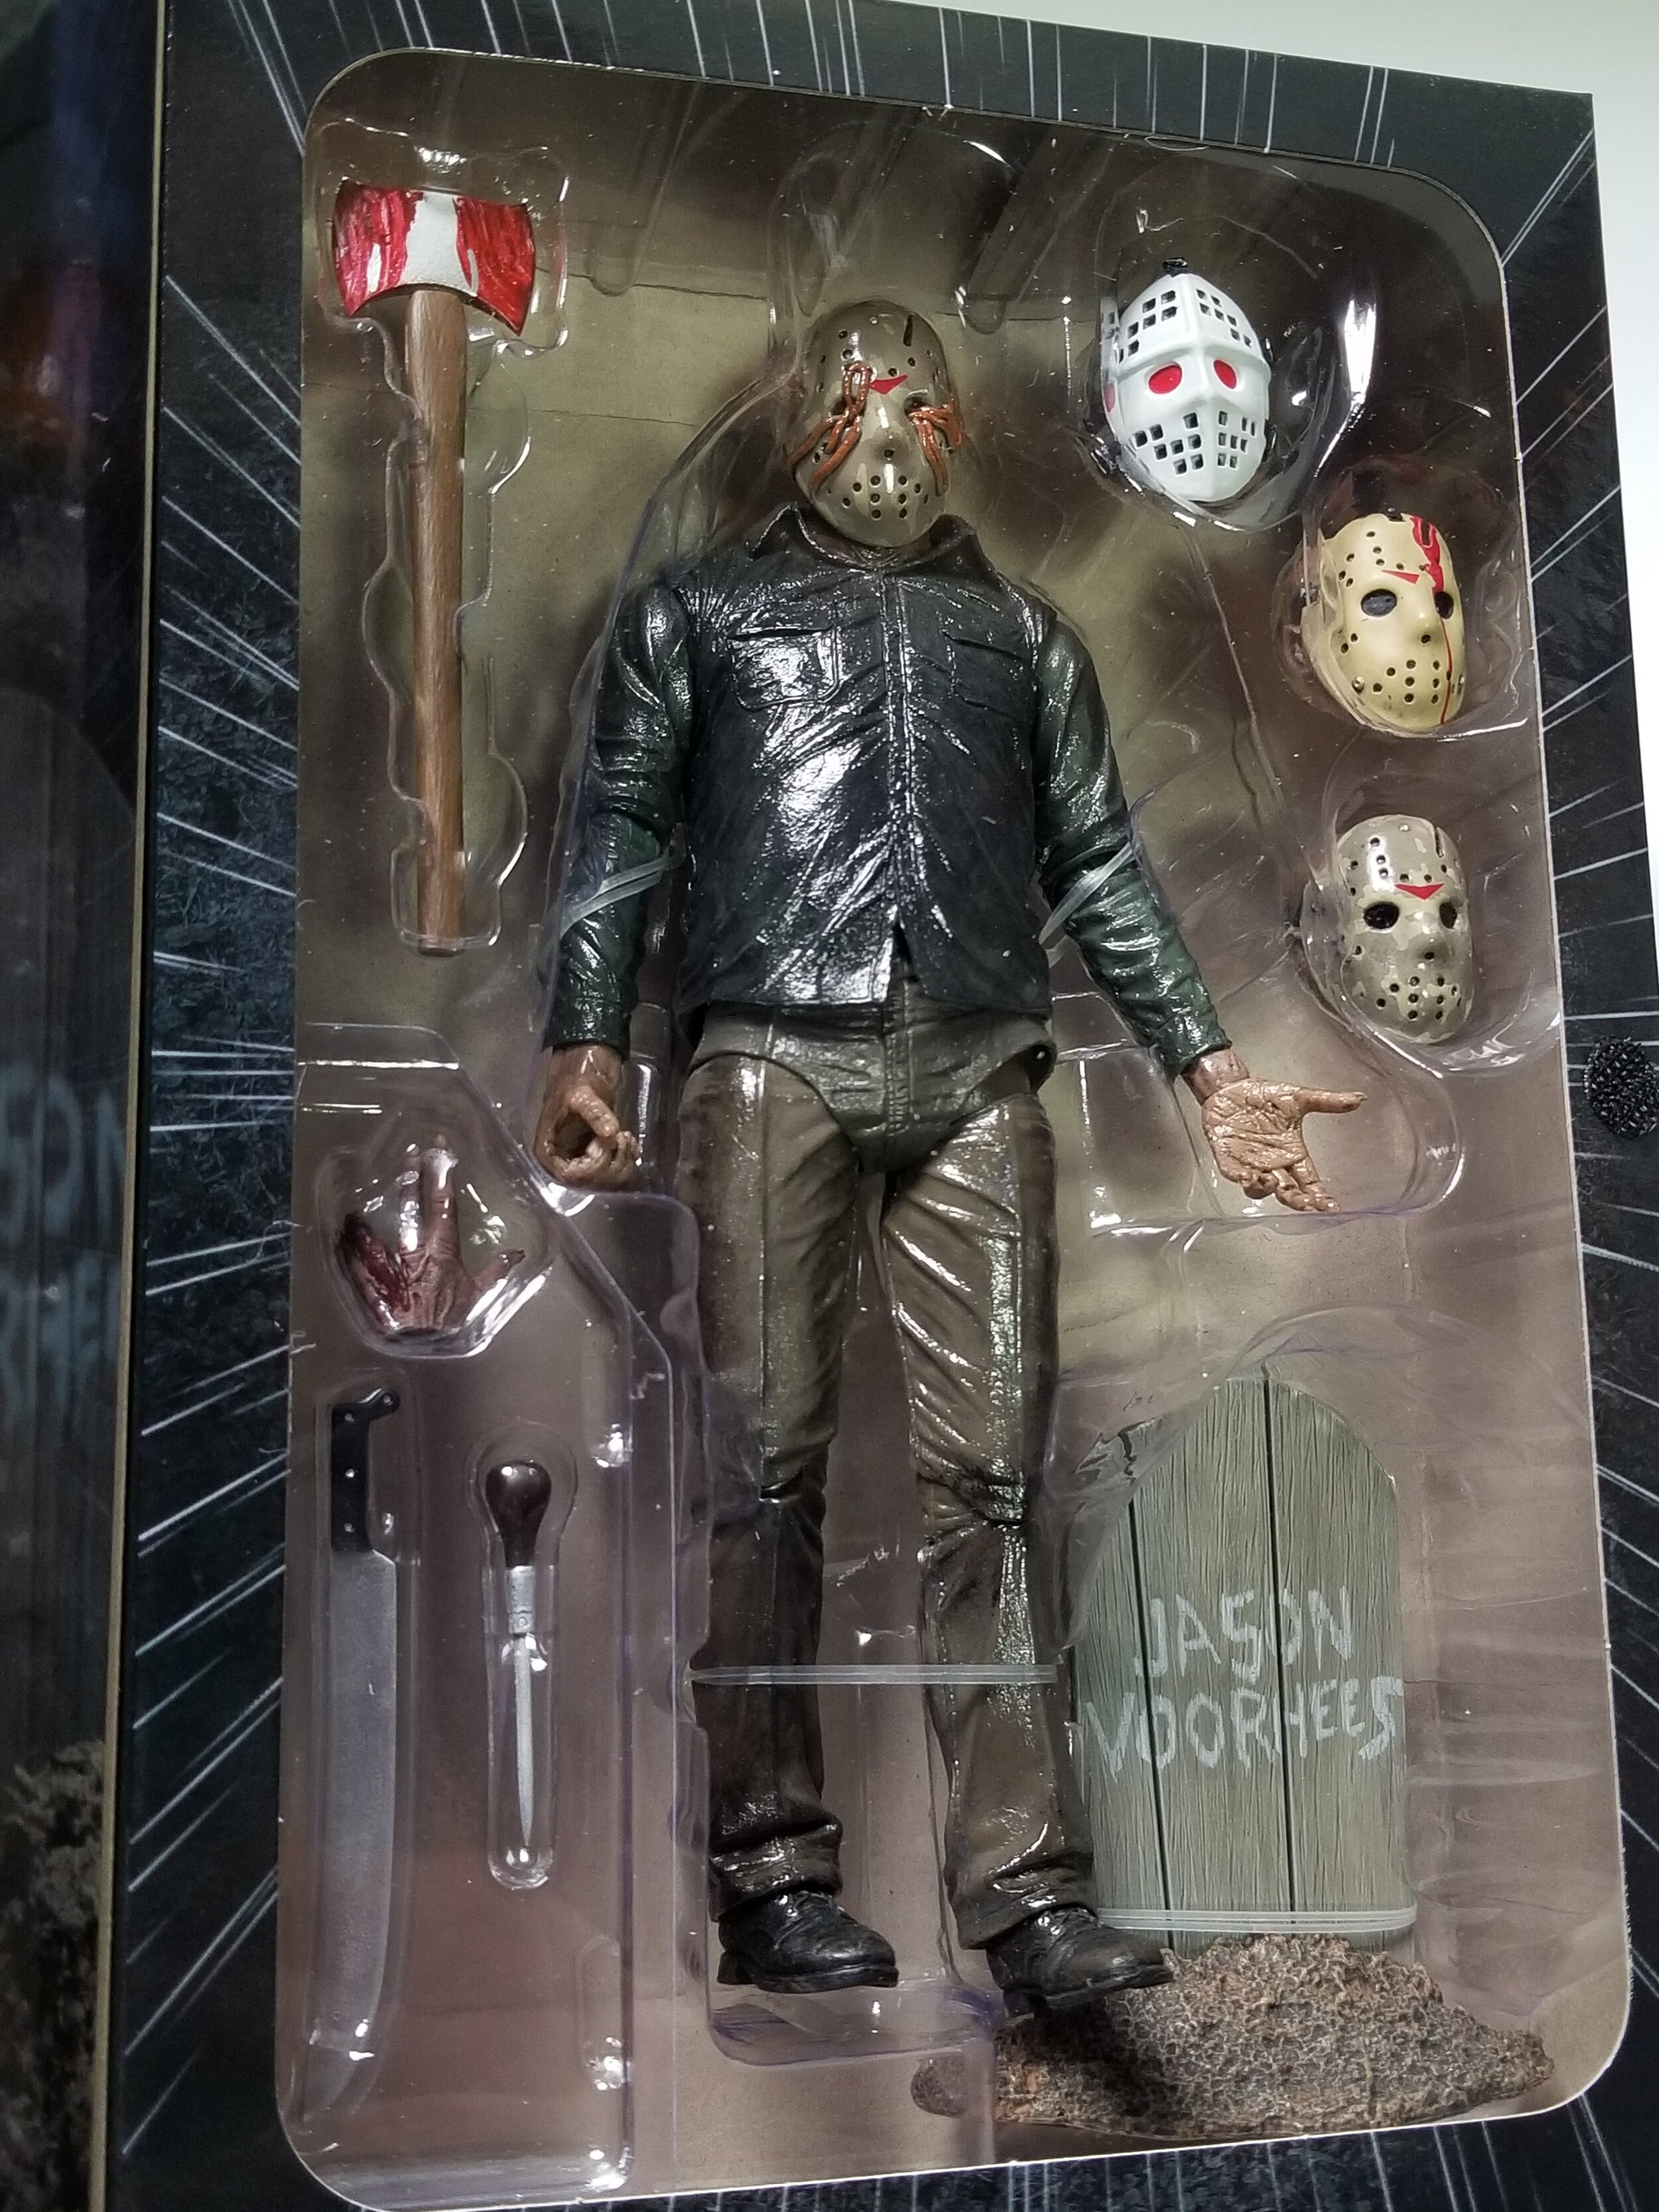 NECA Friday the 13th Jason Voorhees Ultimate Part 5 PVC Action Figure Toy  7 New